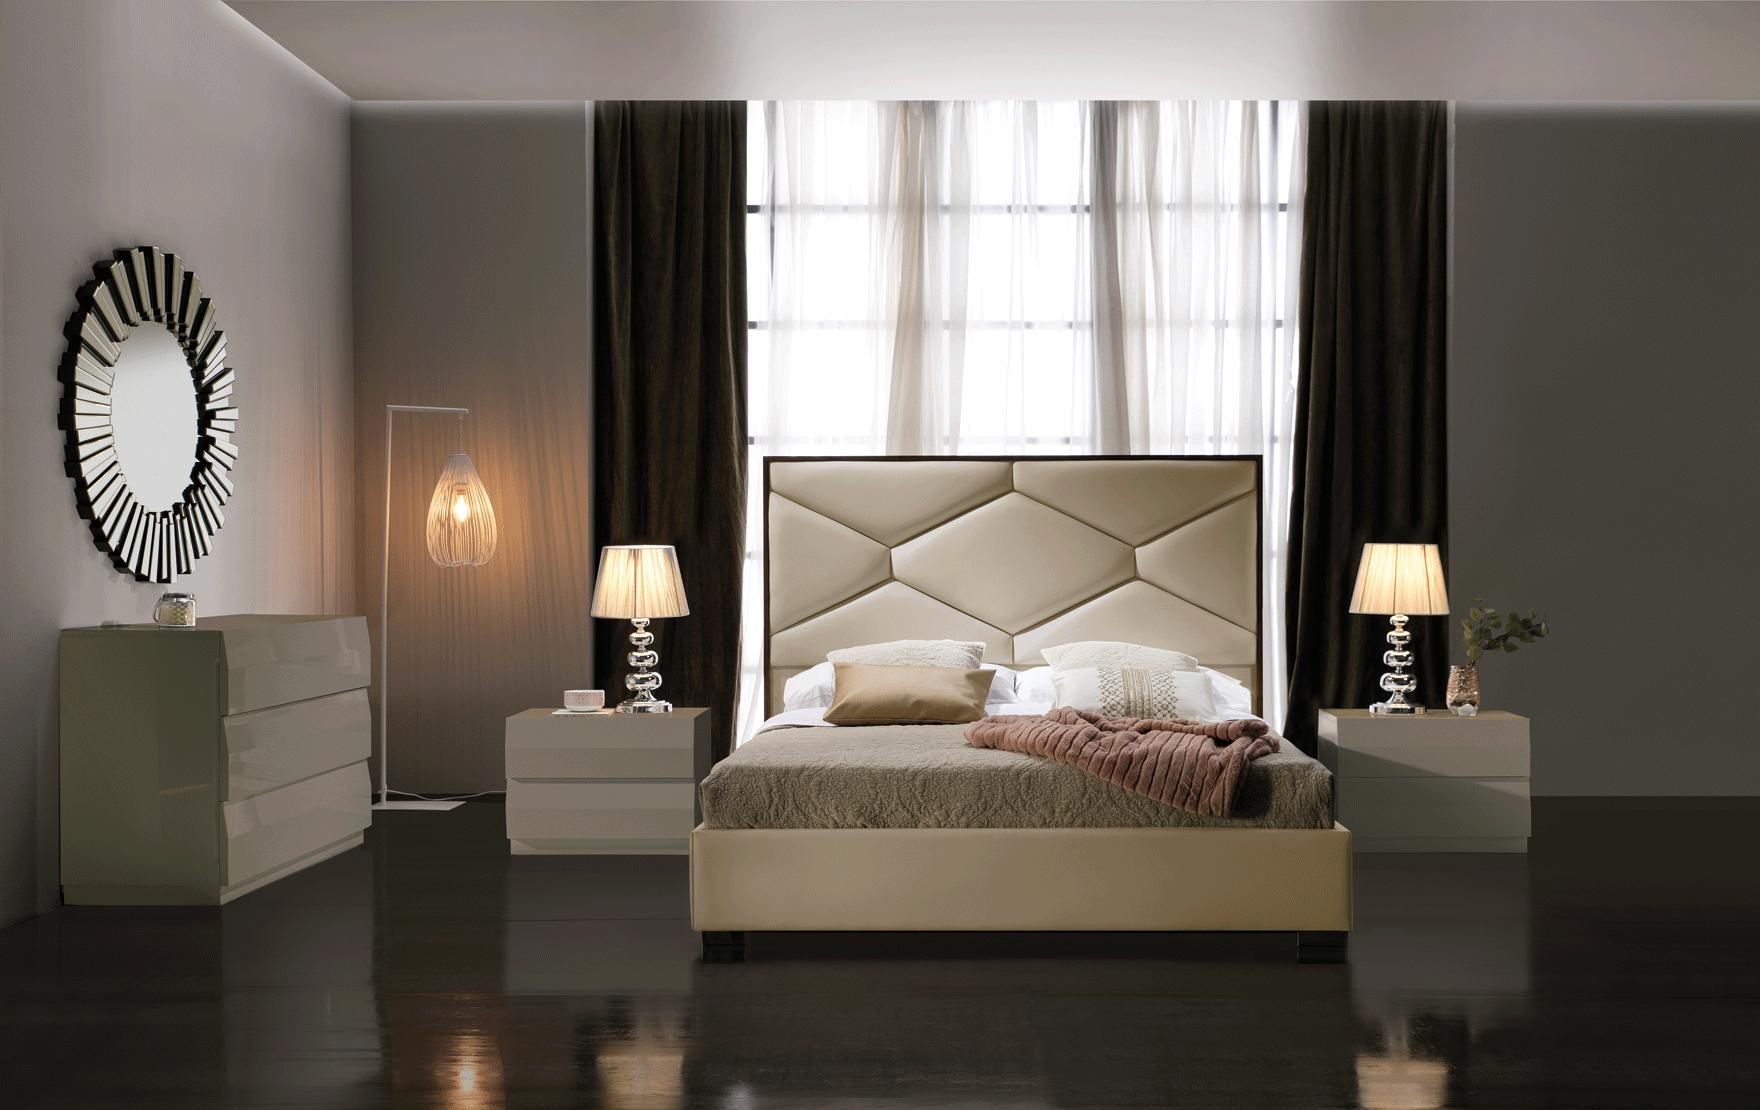 Contemporary, Modern Storage Bedroom Set MARTINABEDKS MARTINABEDKS-2NDM-5PC in Beige Eco-Leather